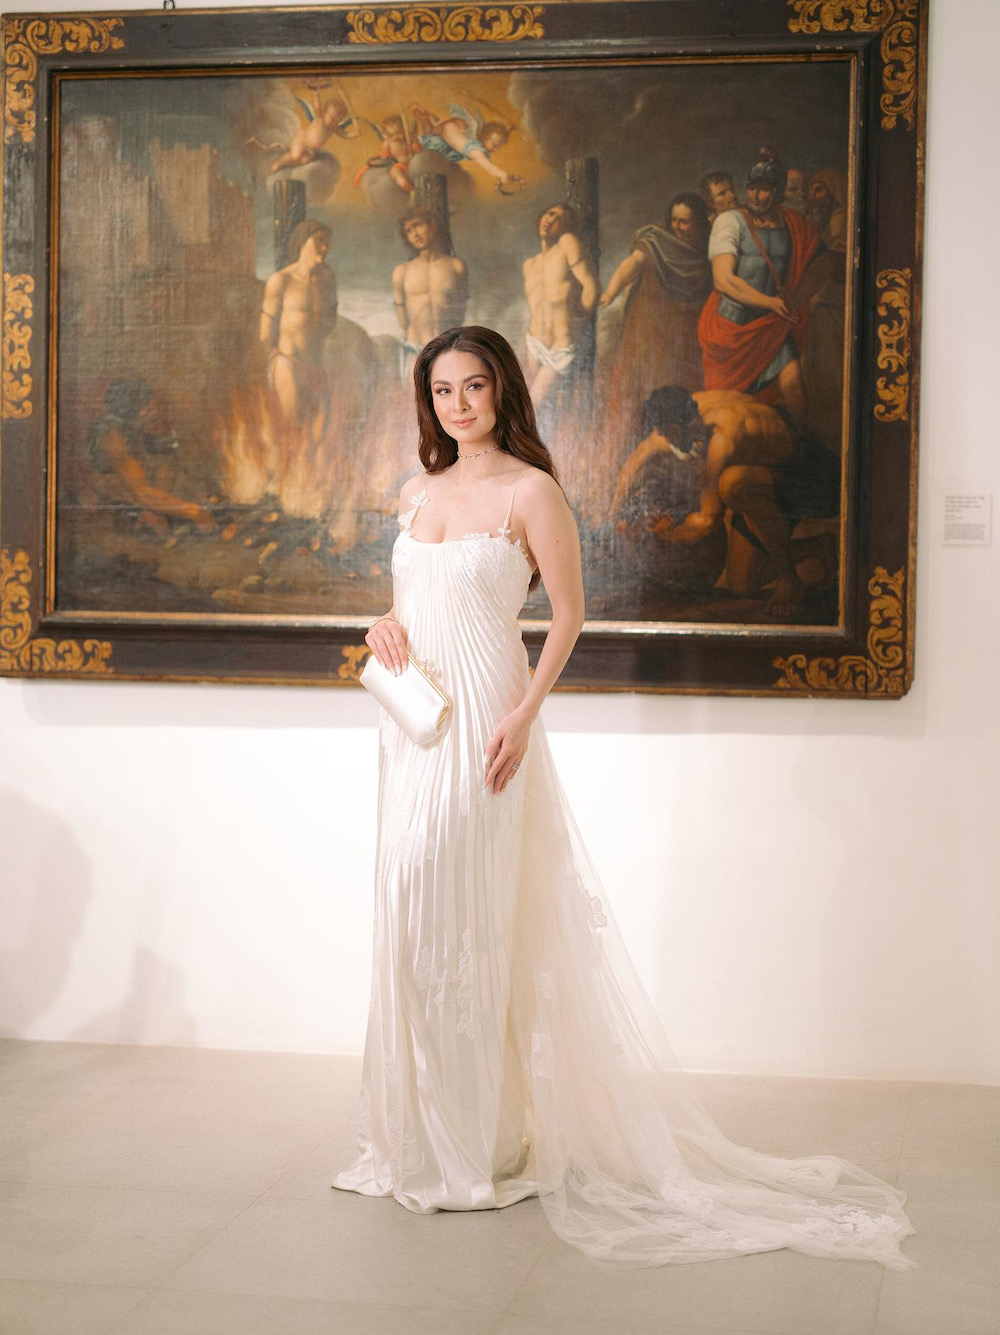 LOOK Marian Rivera's Exact Outfit for GMA Gala Night 2023